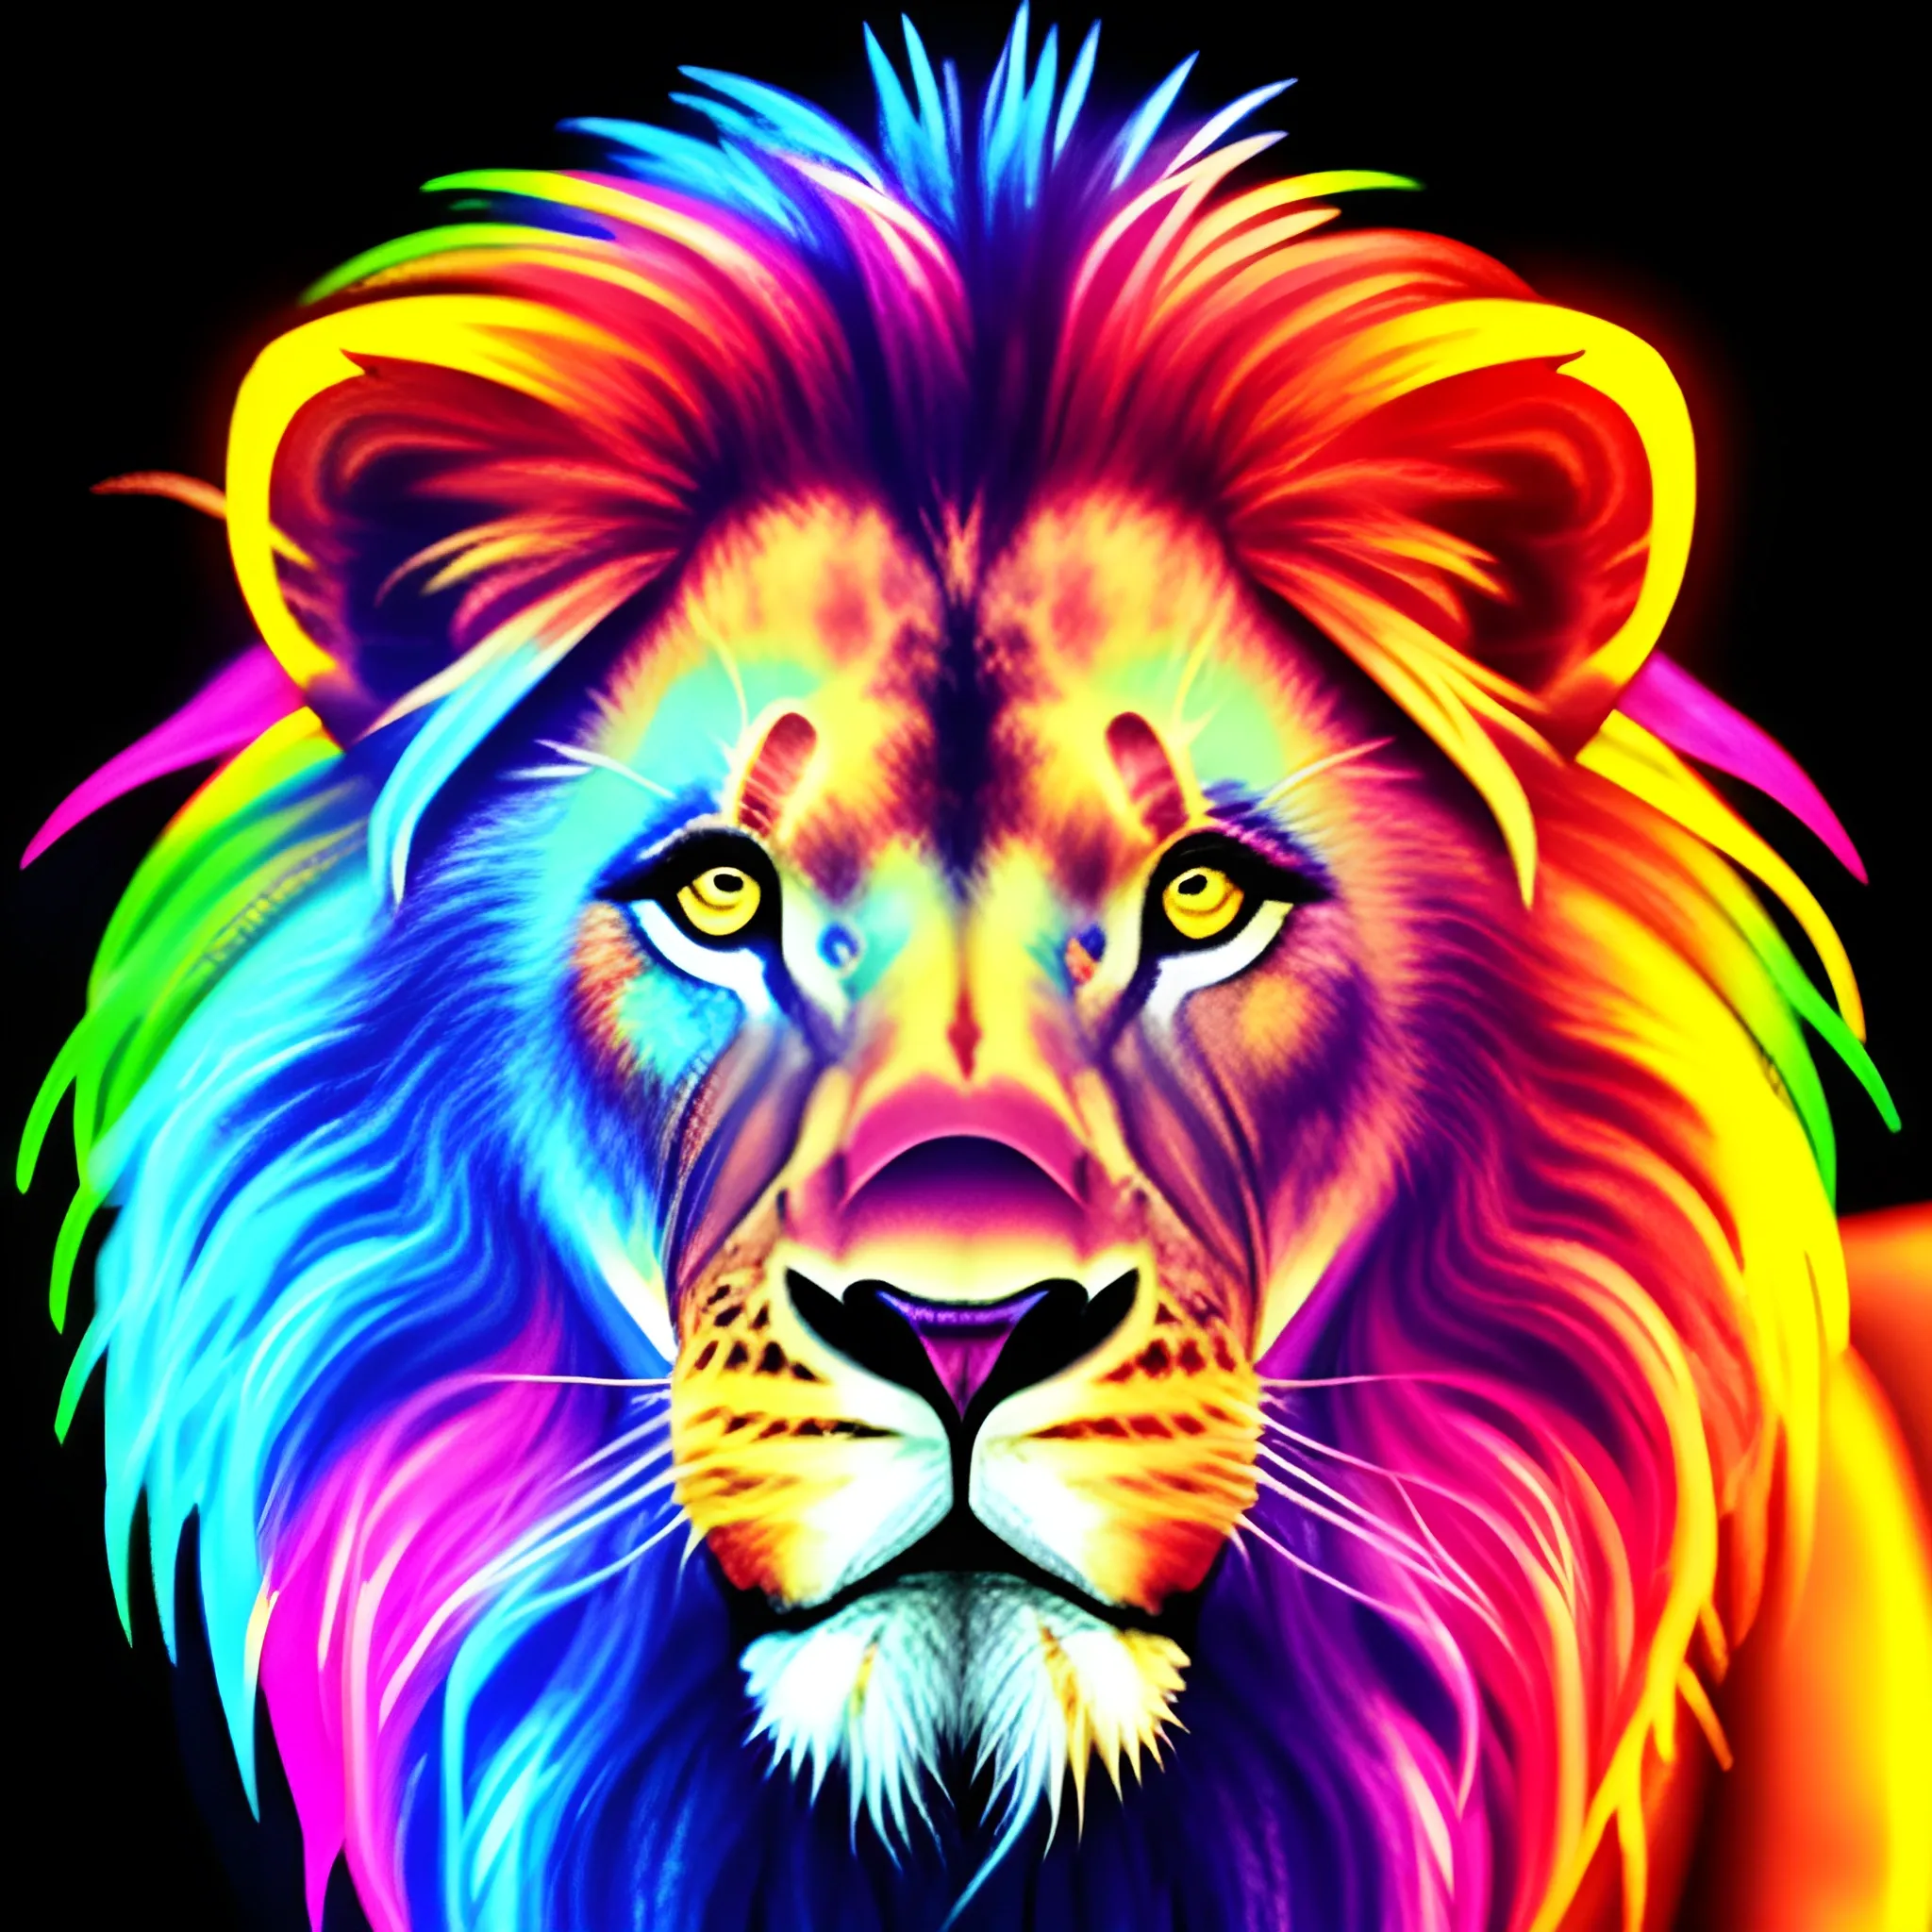 Prompt 1:
/imagine prompt: Lion face, a close-up view of a lion's face outlined in vibrant neon lights against a dark night sky, the neon colors reflecting softly on the lion's fur, making it appear as if the lion is both present and ethereal, Digital art, using bright neon colors and glow effects to enhance the outline and features of the lion's face, --ar 1:1 --v 5
, Water Color